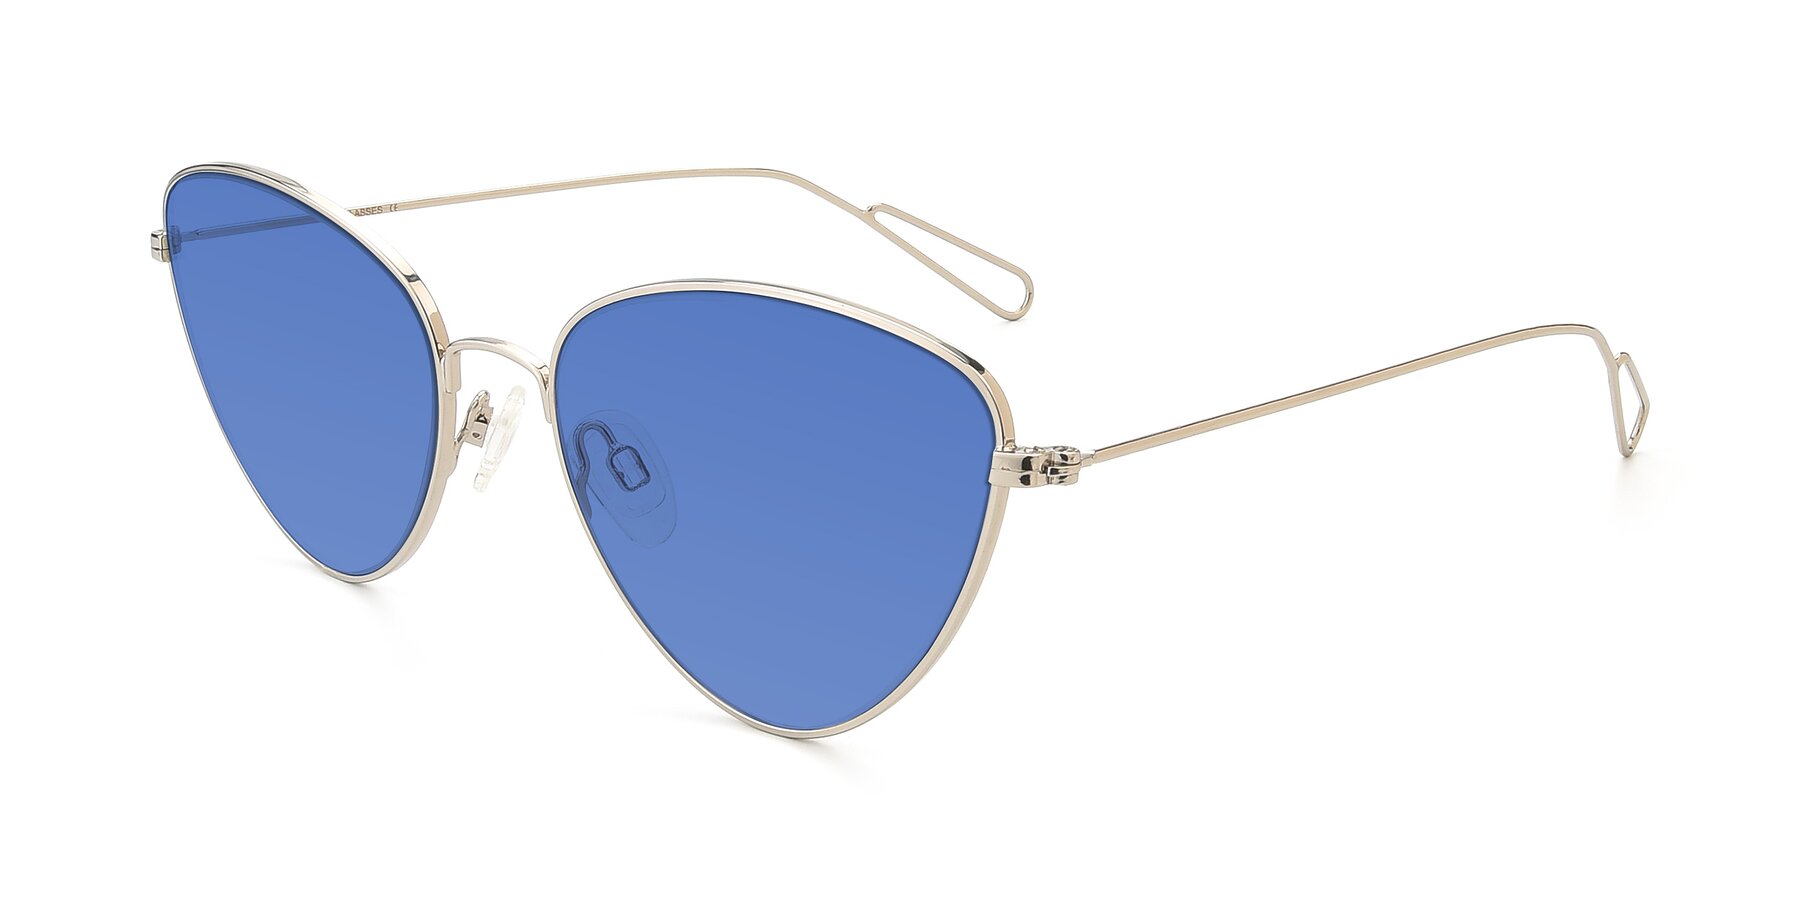 Angle of Butterfly Effect in Silver with Blue Tinted Lenses